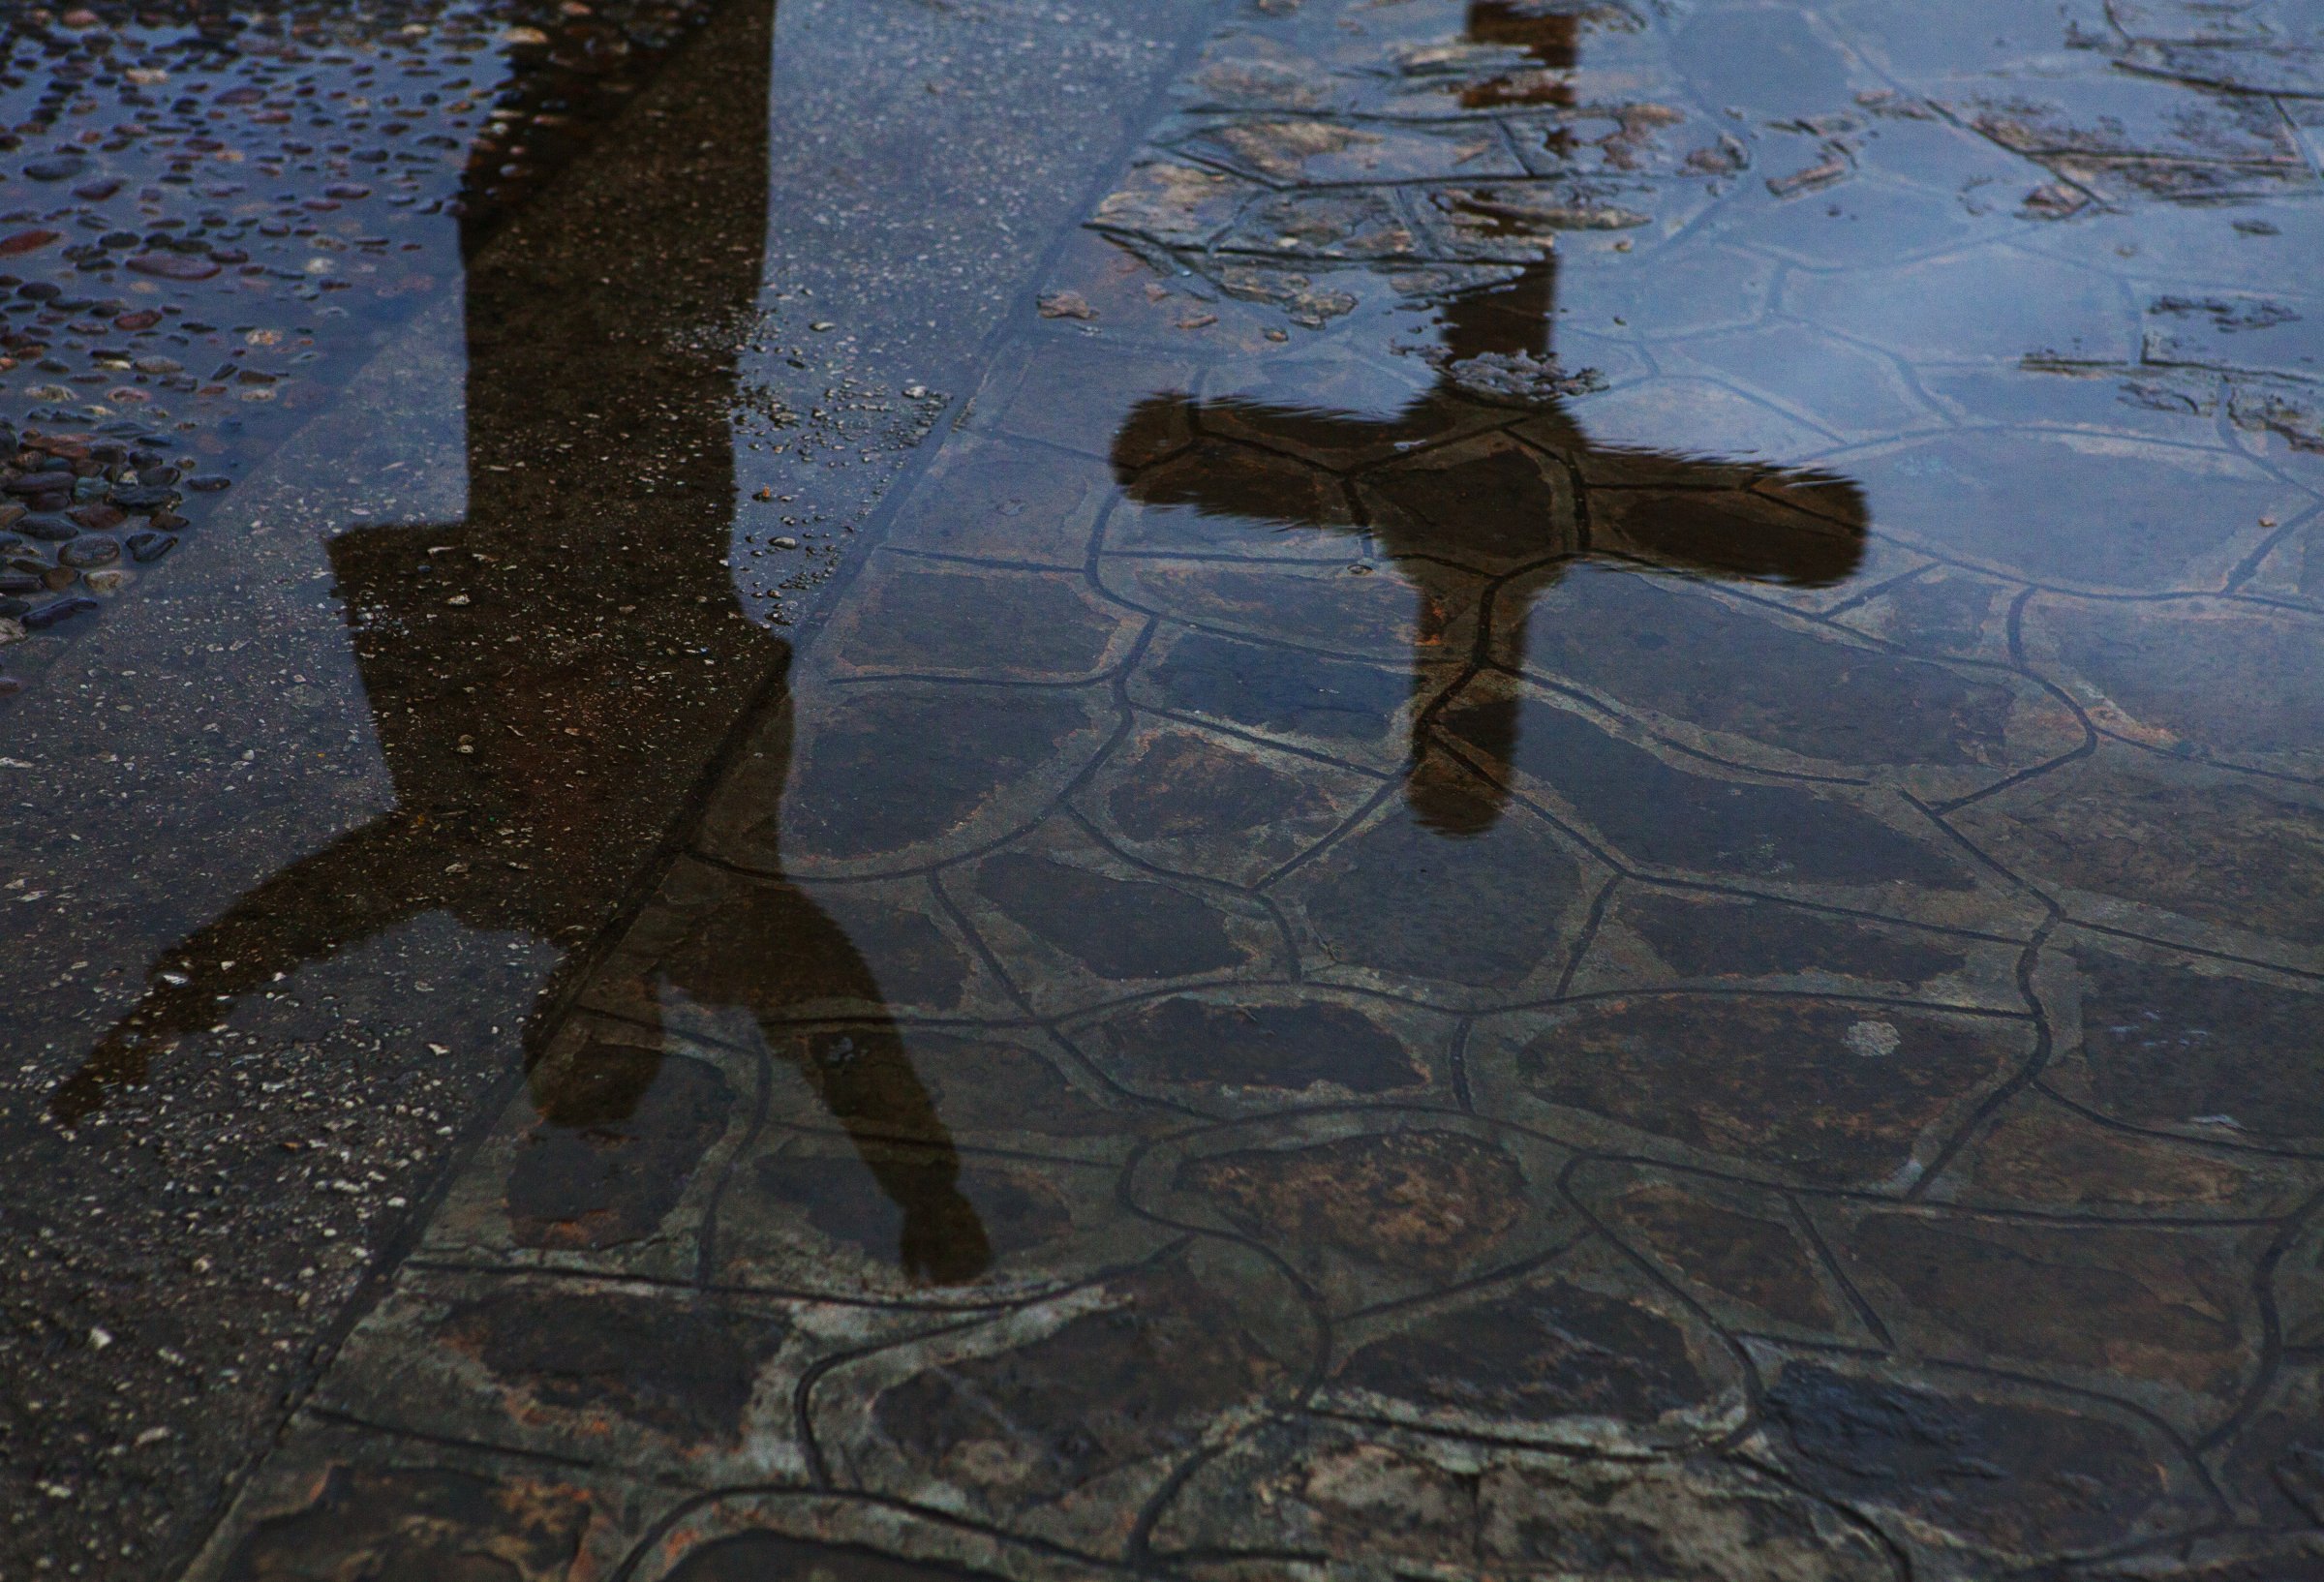 Reflection of man and crucifix in city puddle